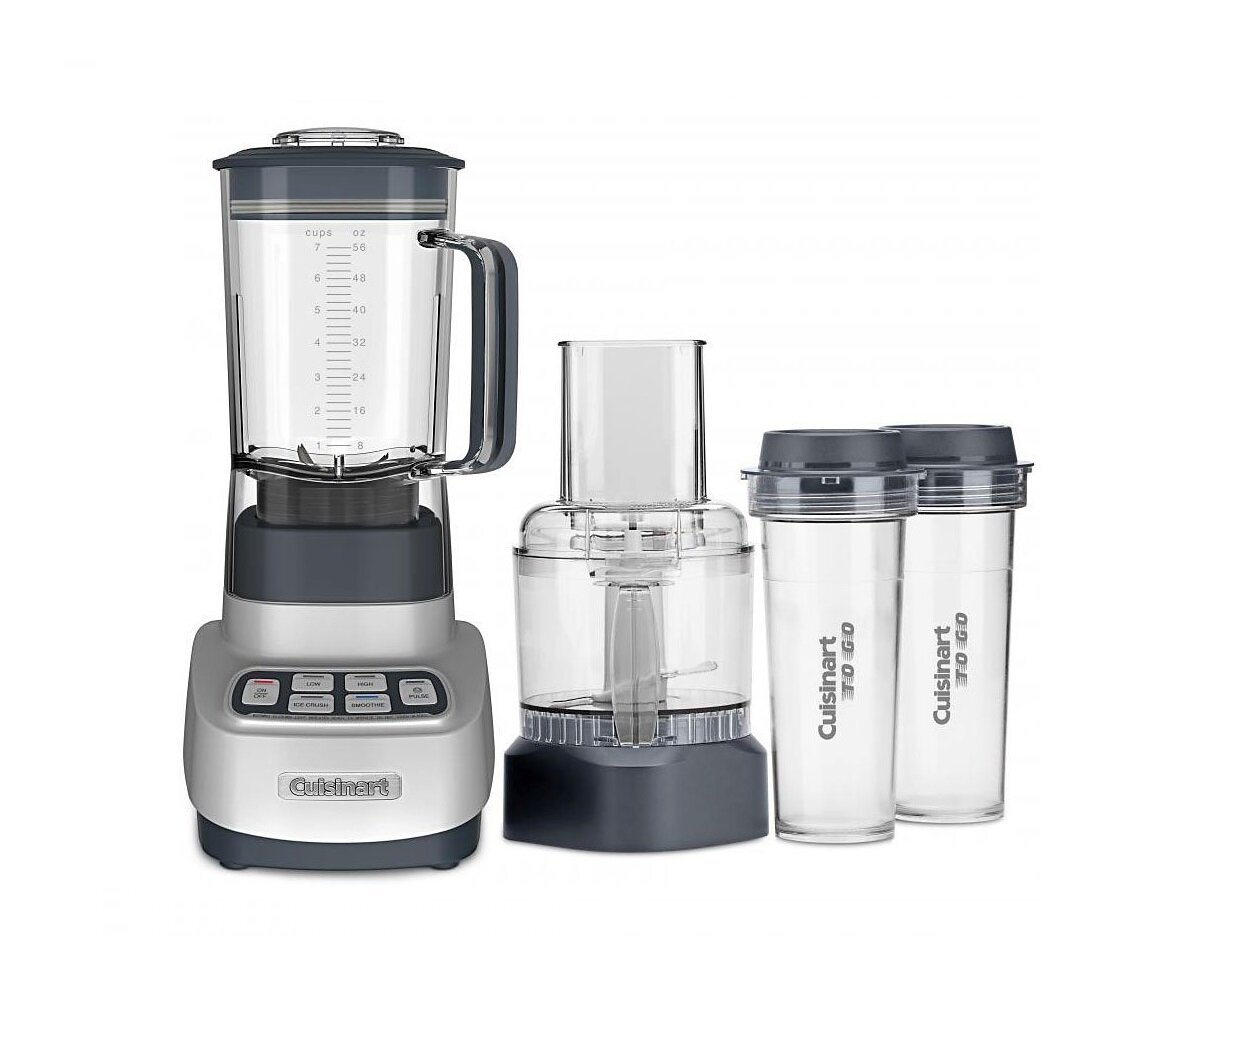  Magic Bullet MB50200 Kitchen Express, Silver, 3.5 cup